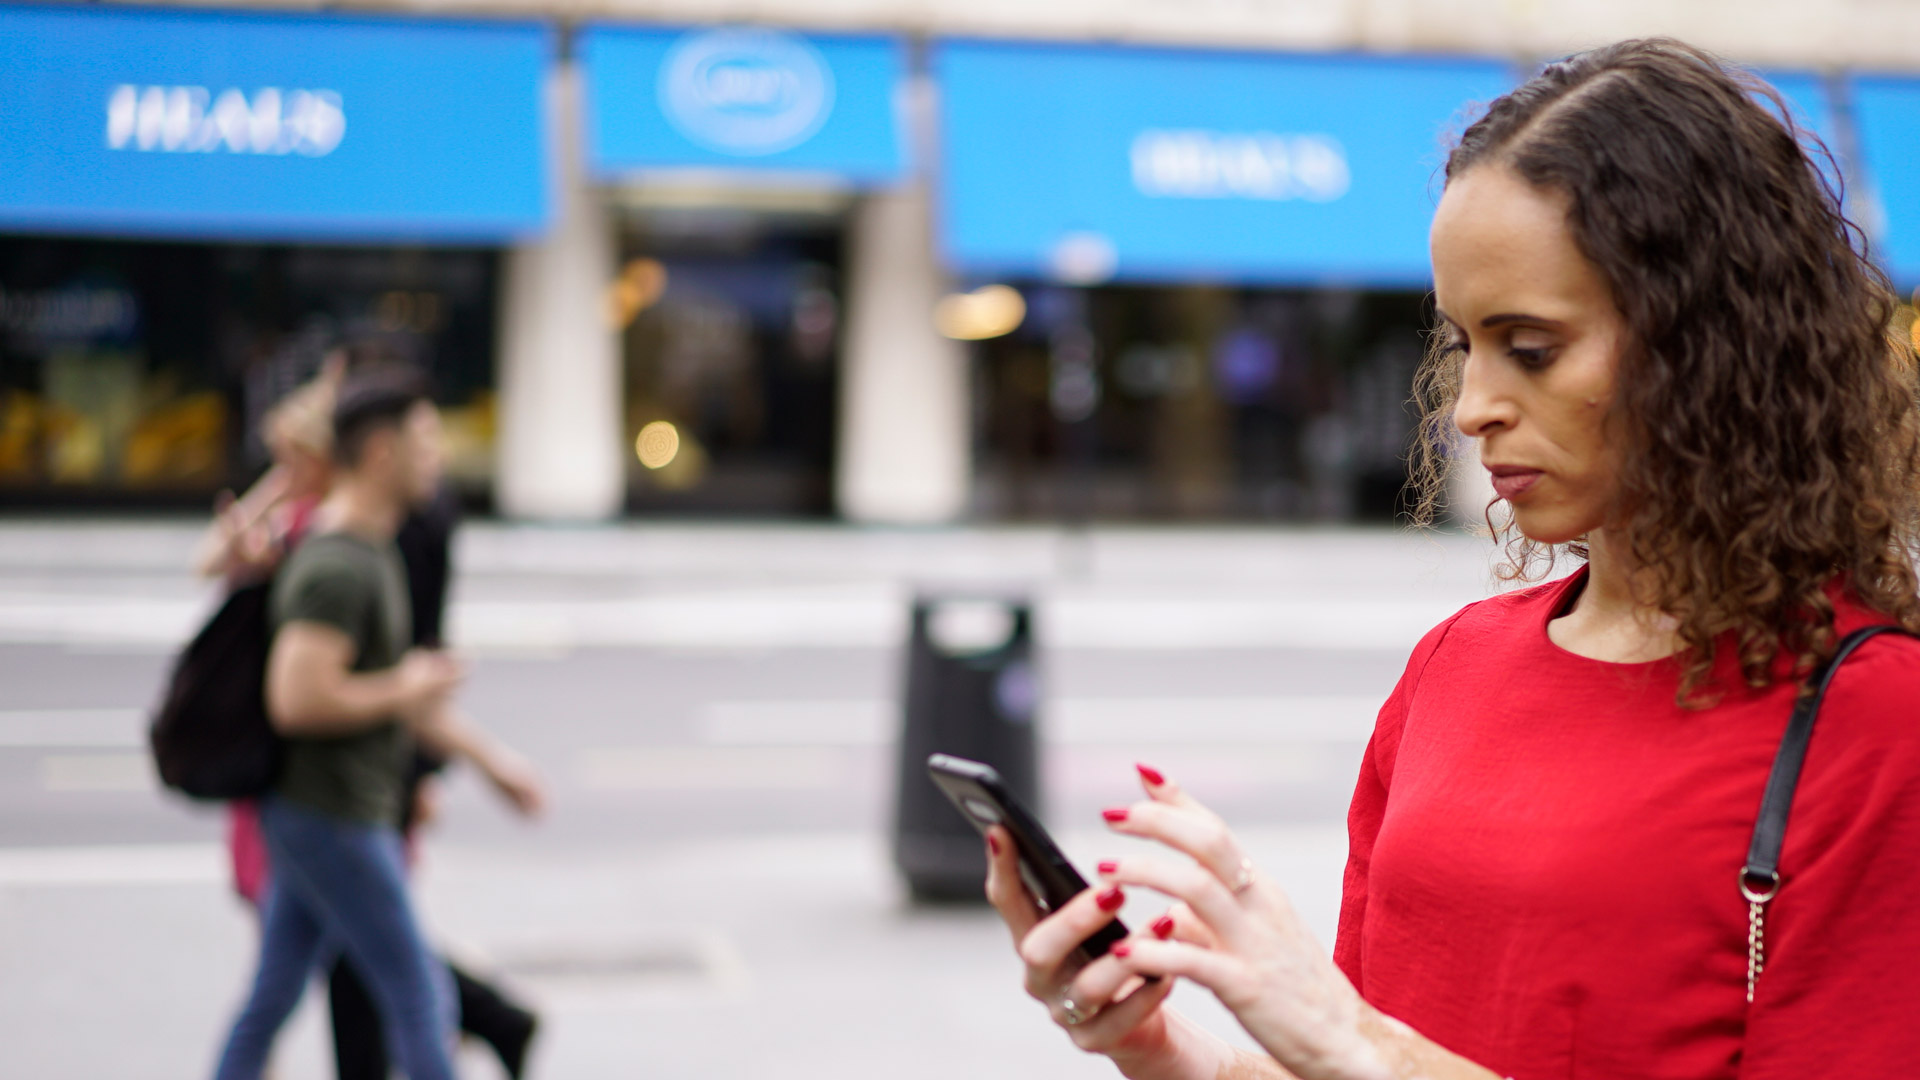 Natalie using a smartphone on the street, with passers-by and shops in the background